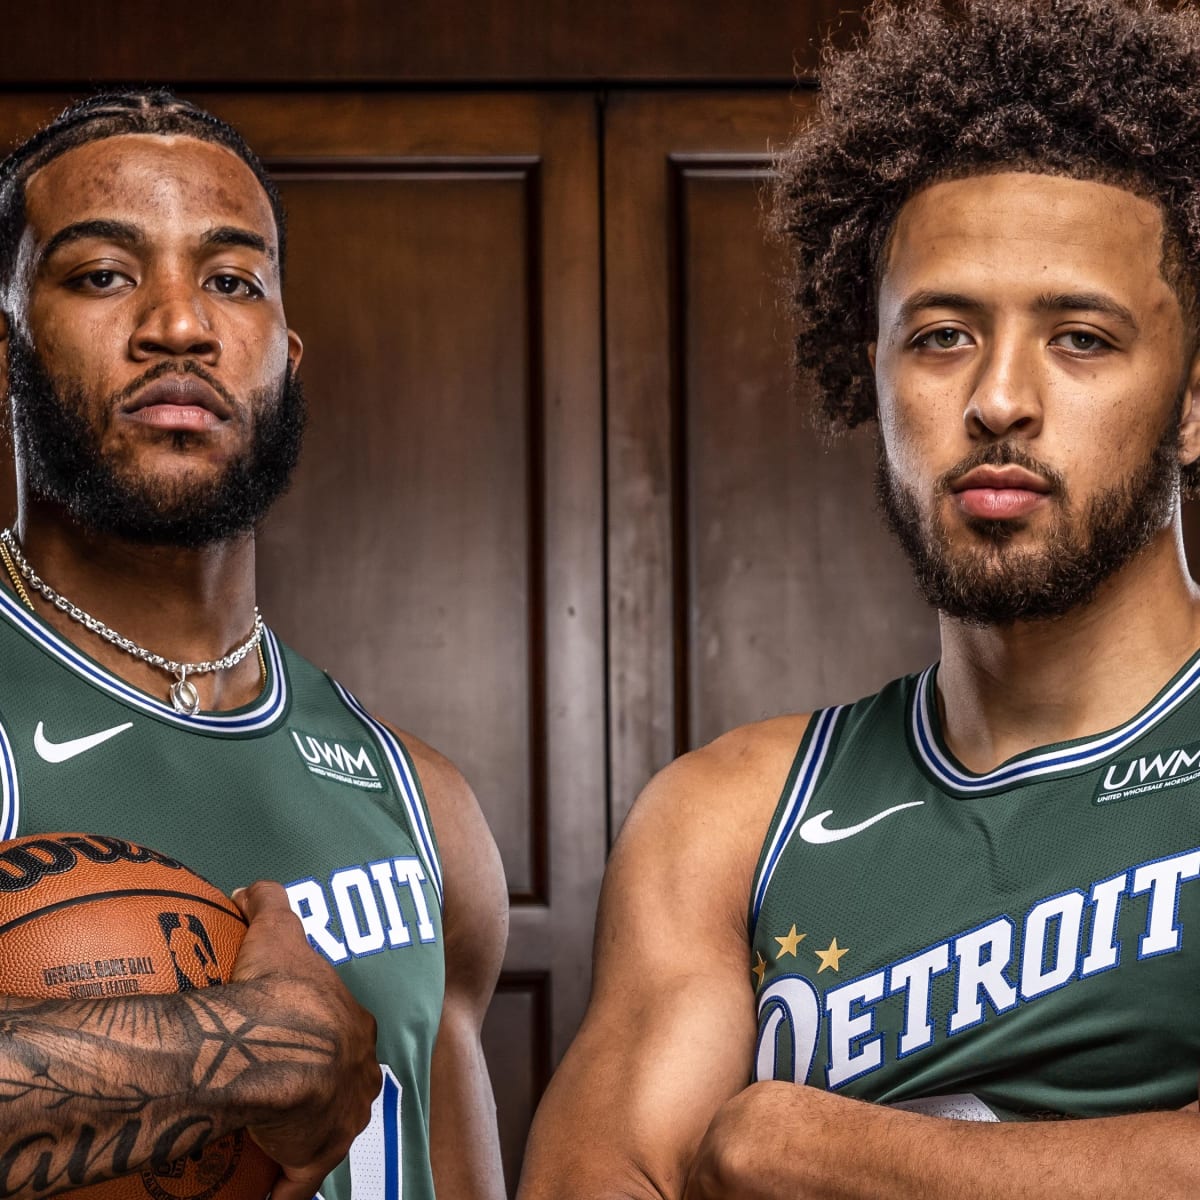 Detroit Pistons special jerseys honor historic St. Cecilia's Gym; see the  pics